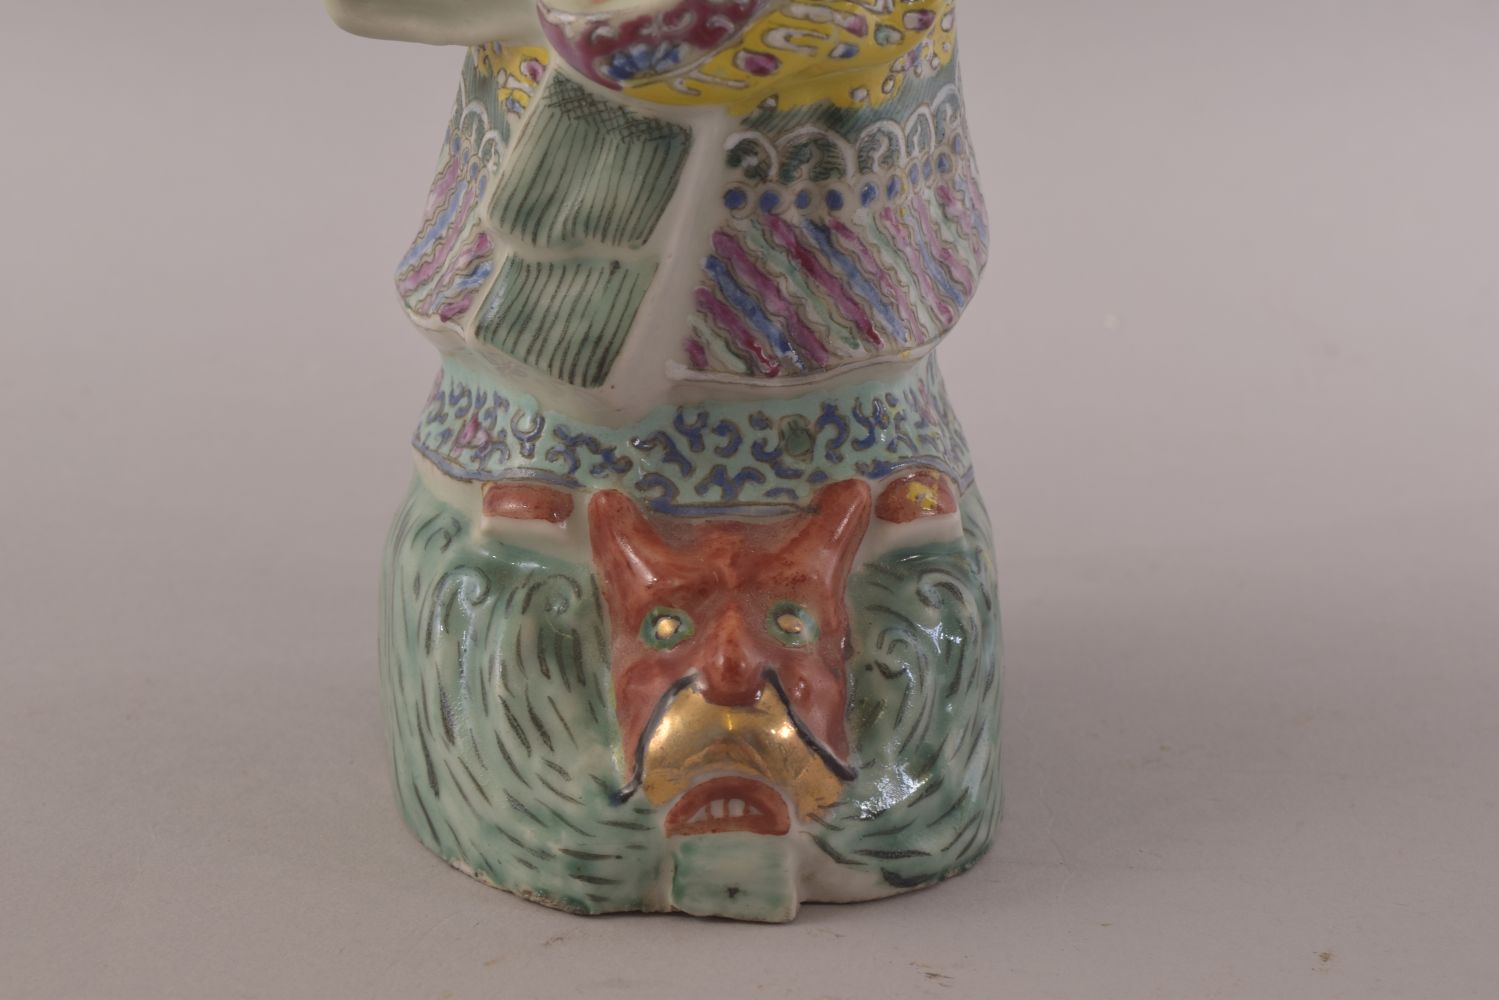 A CHINESE FAMILLE ROSE PORCELAIN FIGURE OF A SAGE, stood upon a wave formation with a mask of a - Image 7 of 8